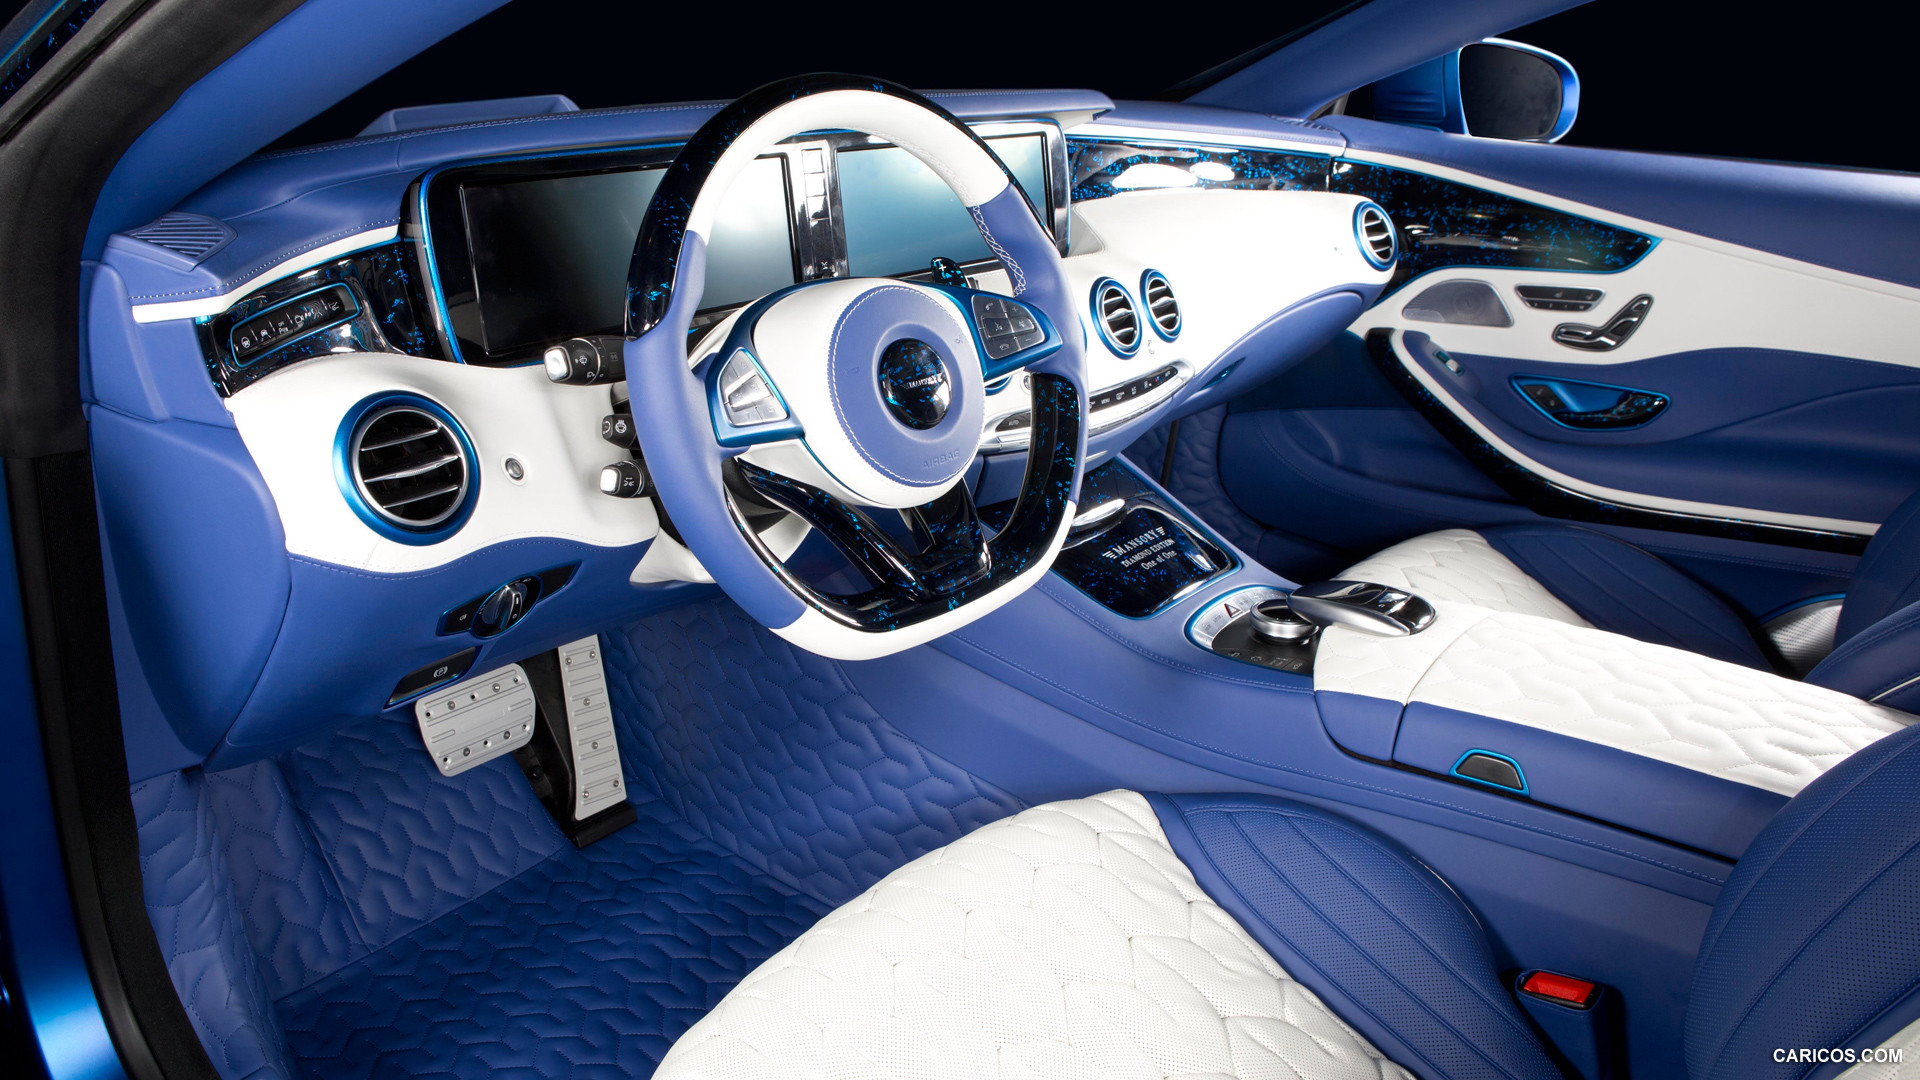 2015 Mansory Mercedes-Benz S63 AMG Coupe Diamond Edition  - Interior, #6 of 7